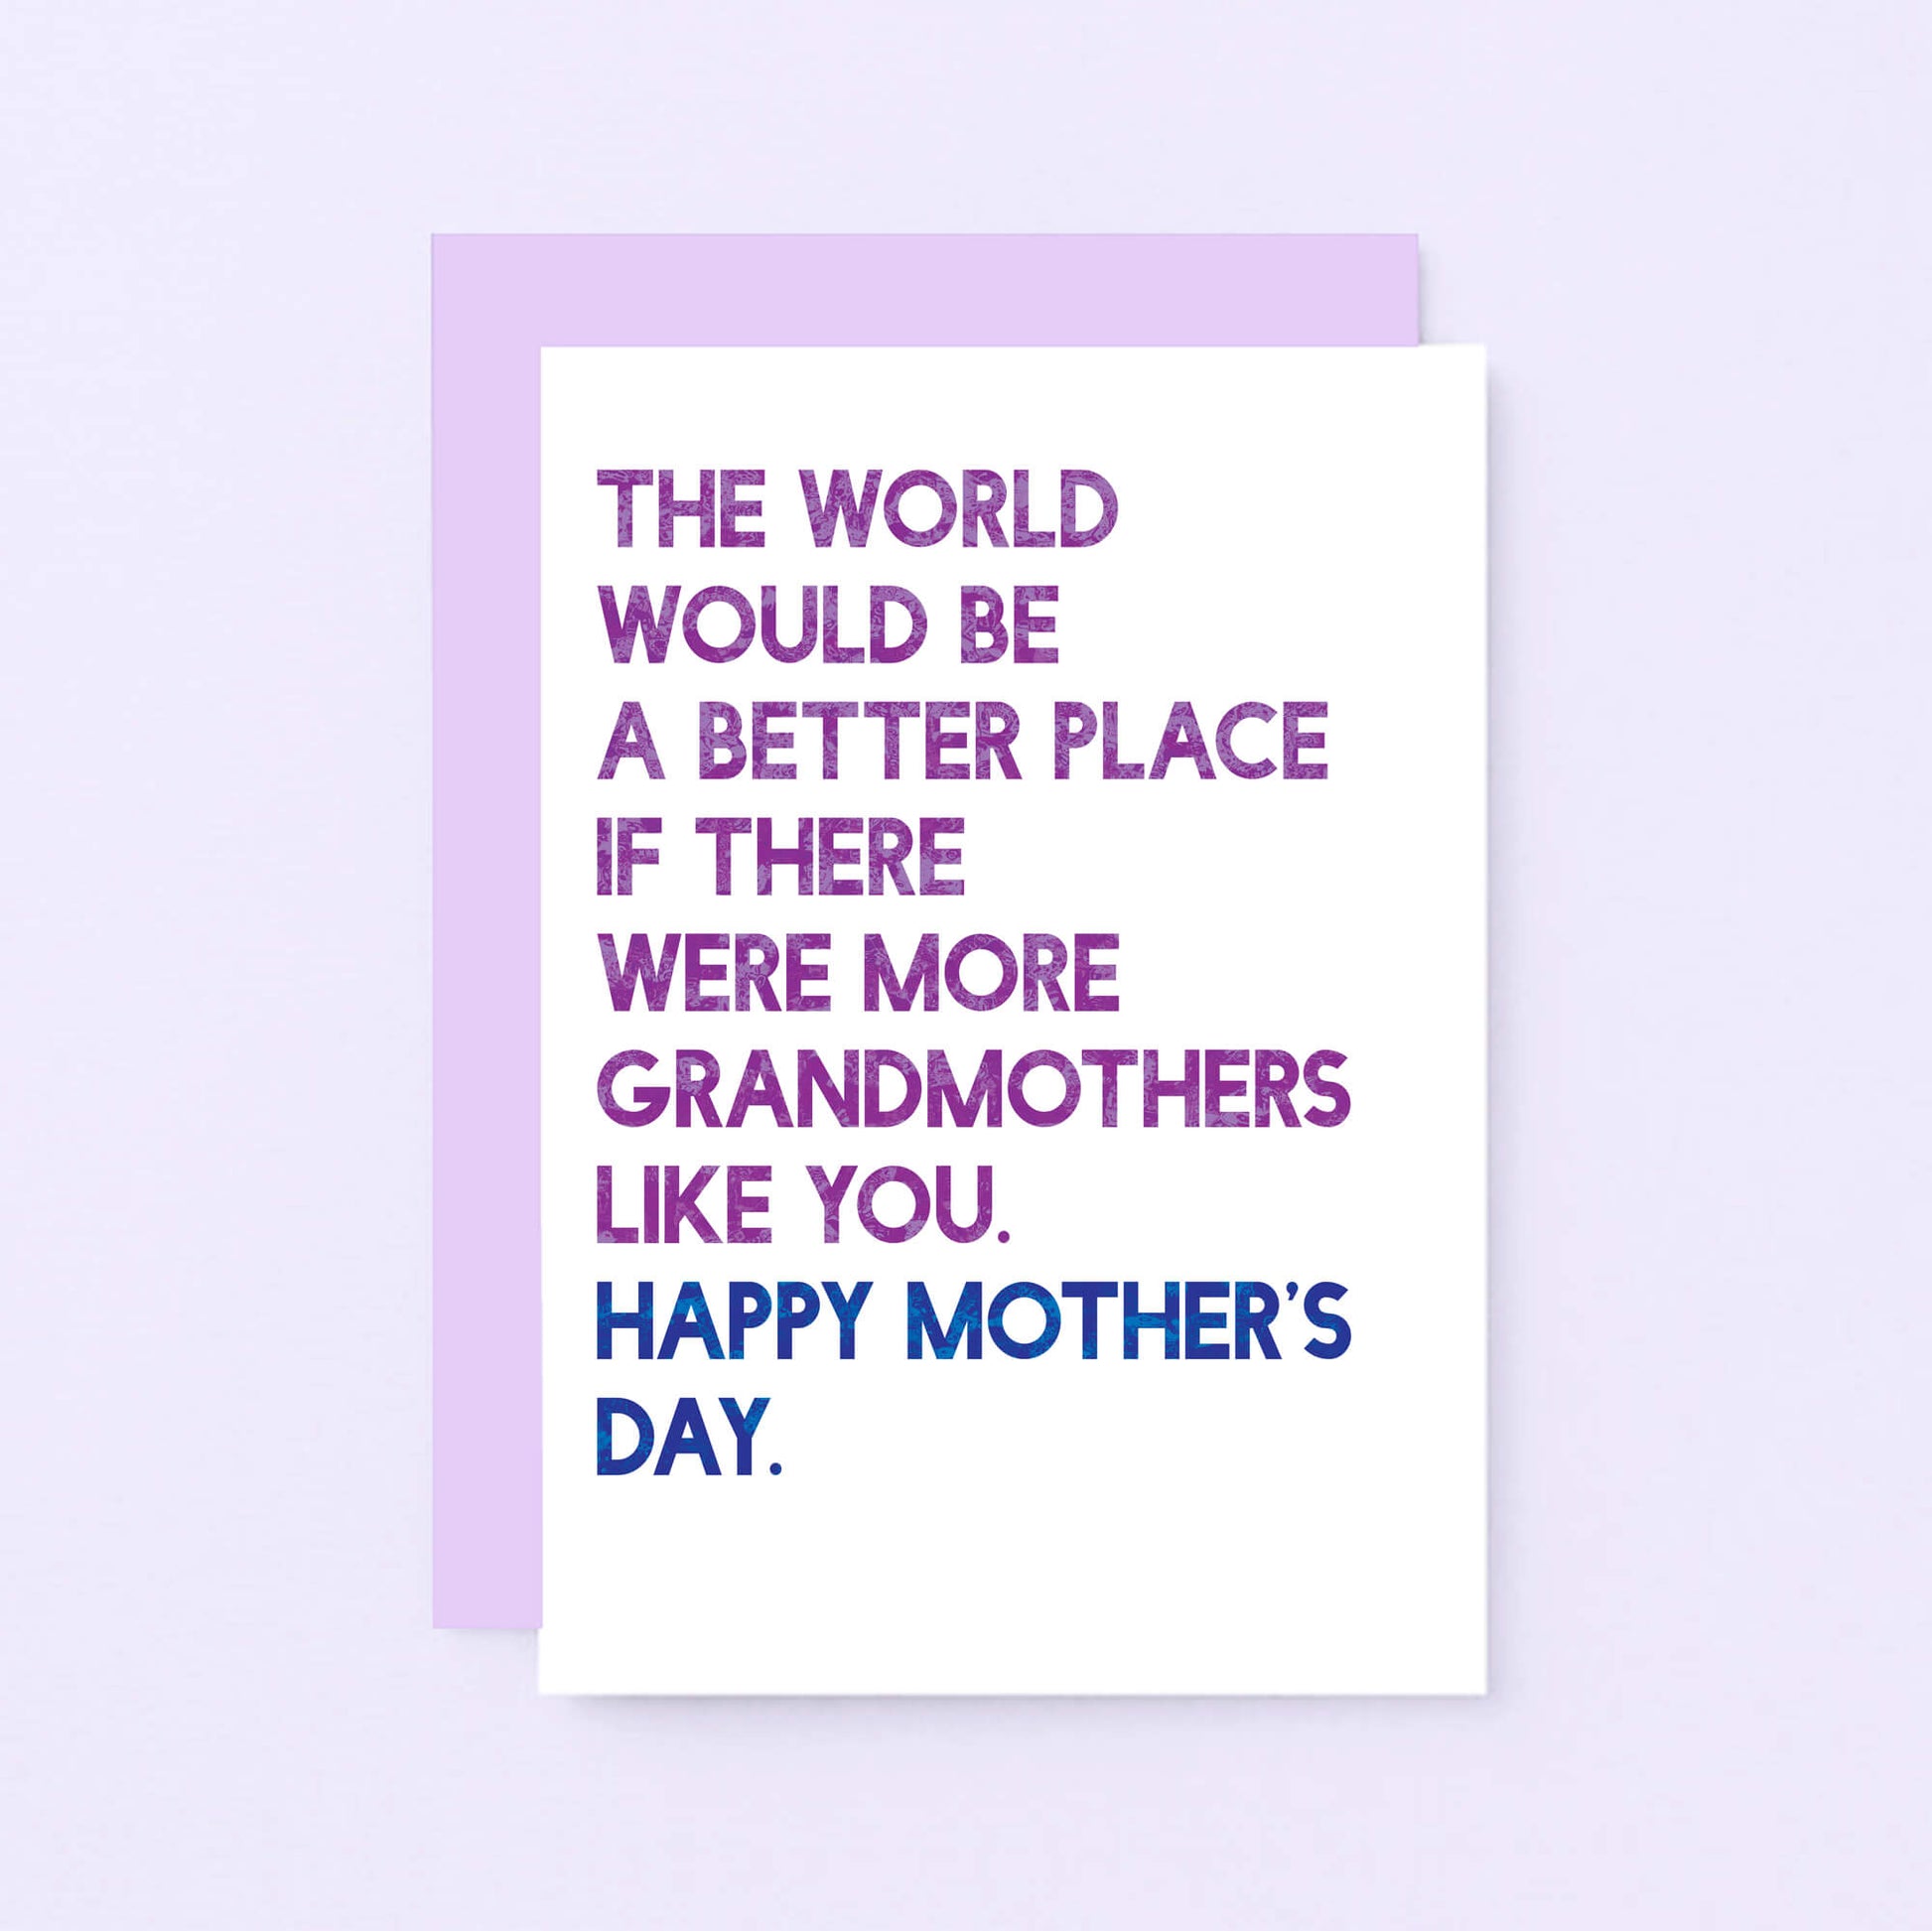 Mother's Day Card For Grandmother by SixElevenCreations. Card reads The world would be a better place if there were more grandmothers like you. Happy Mother's Day. Product Code SEM0035A6